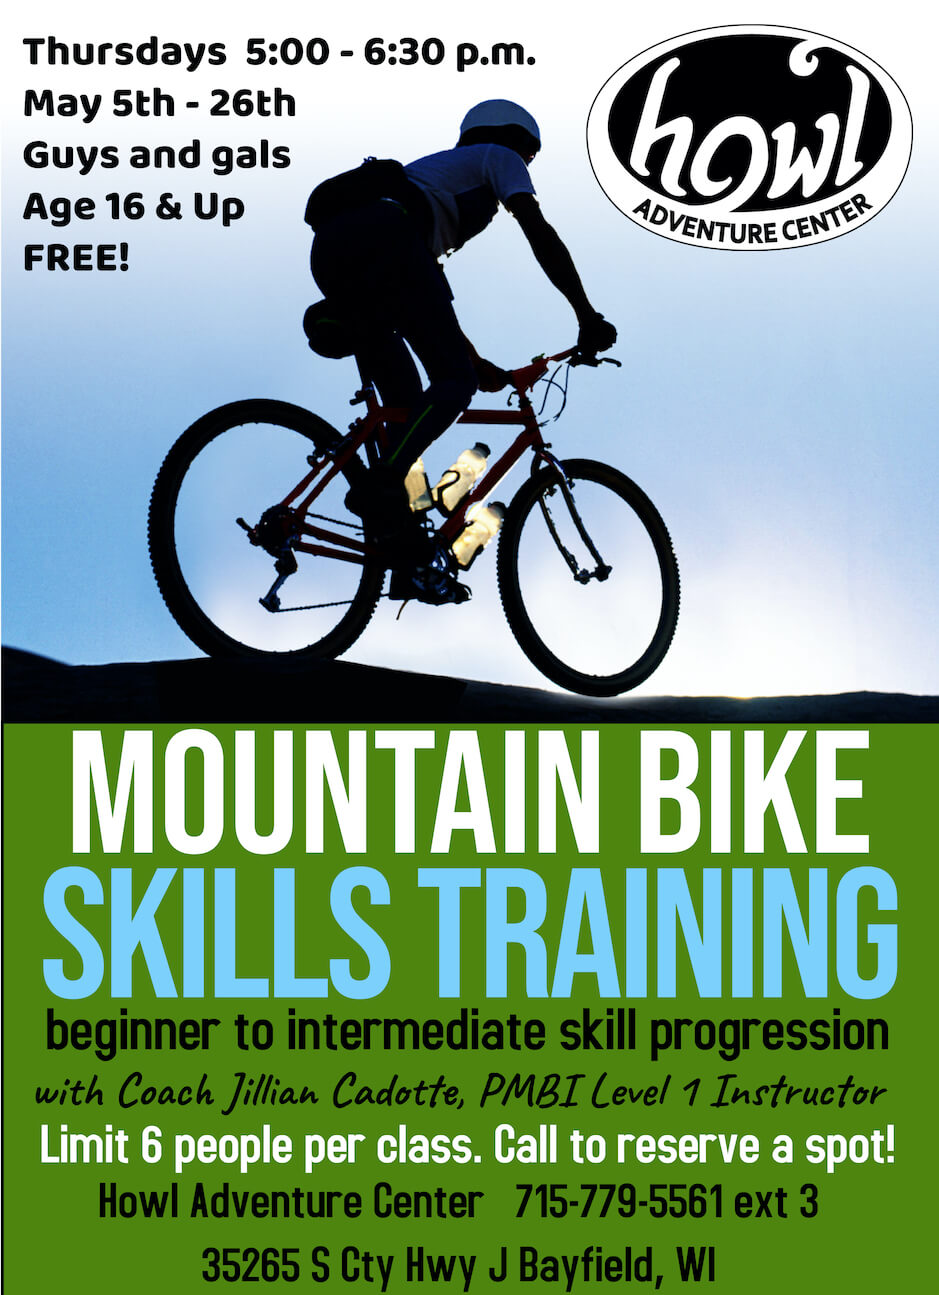 call for free mtb bike lessons on thursdays in may